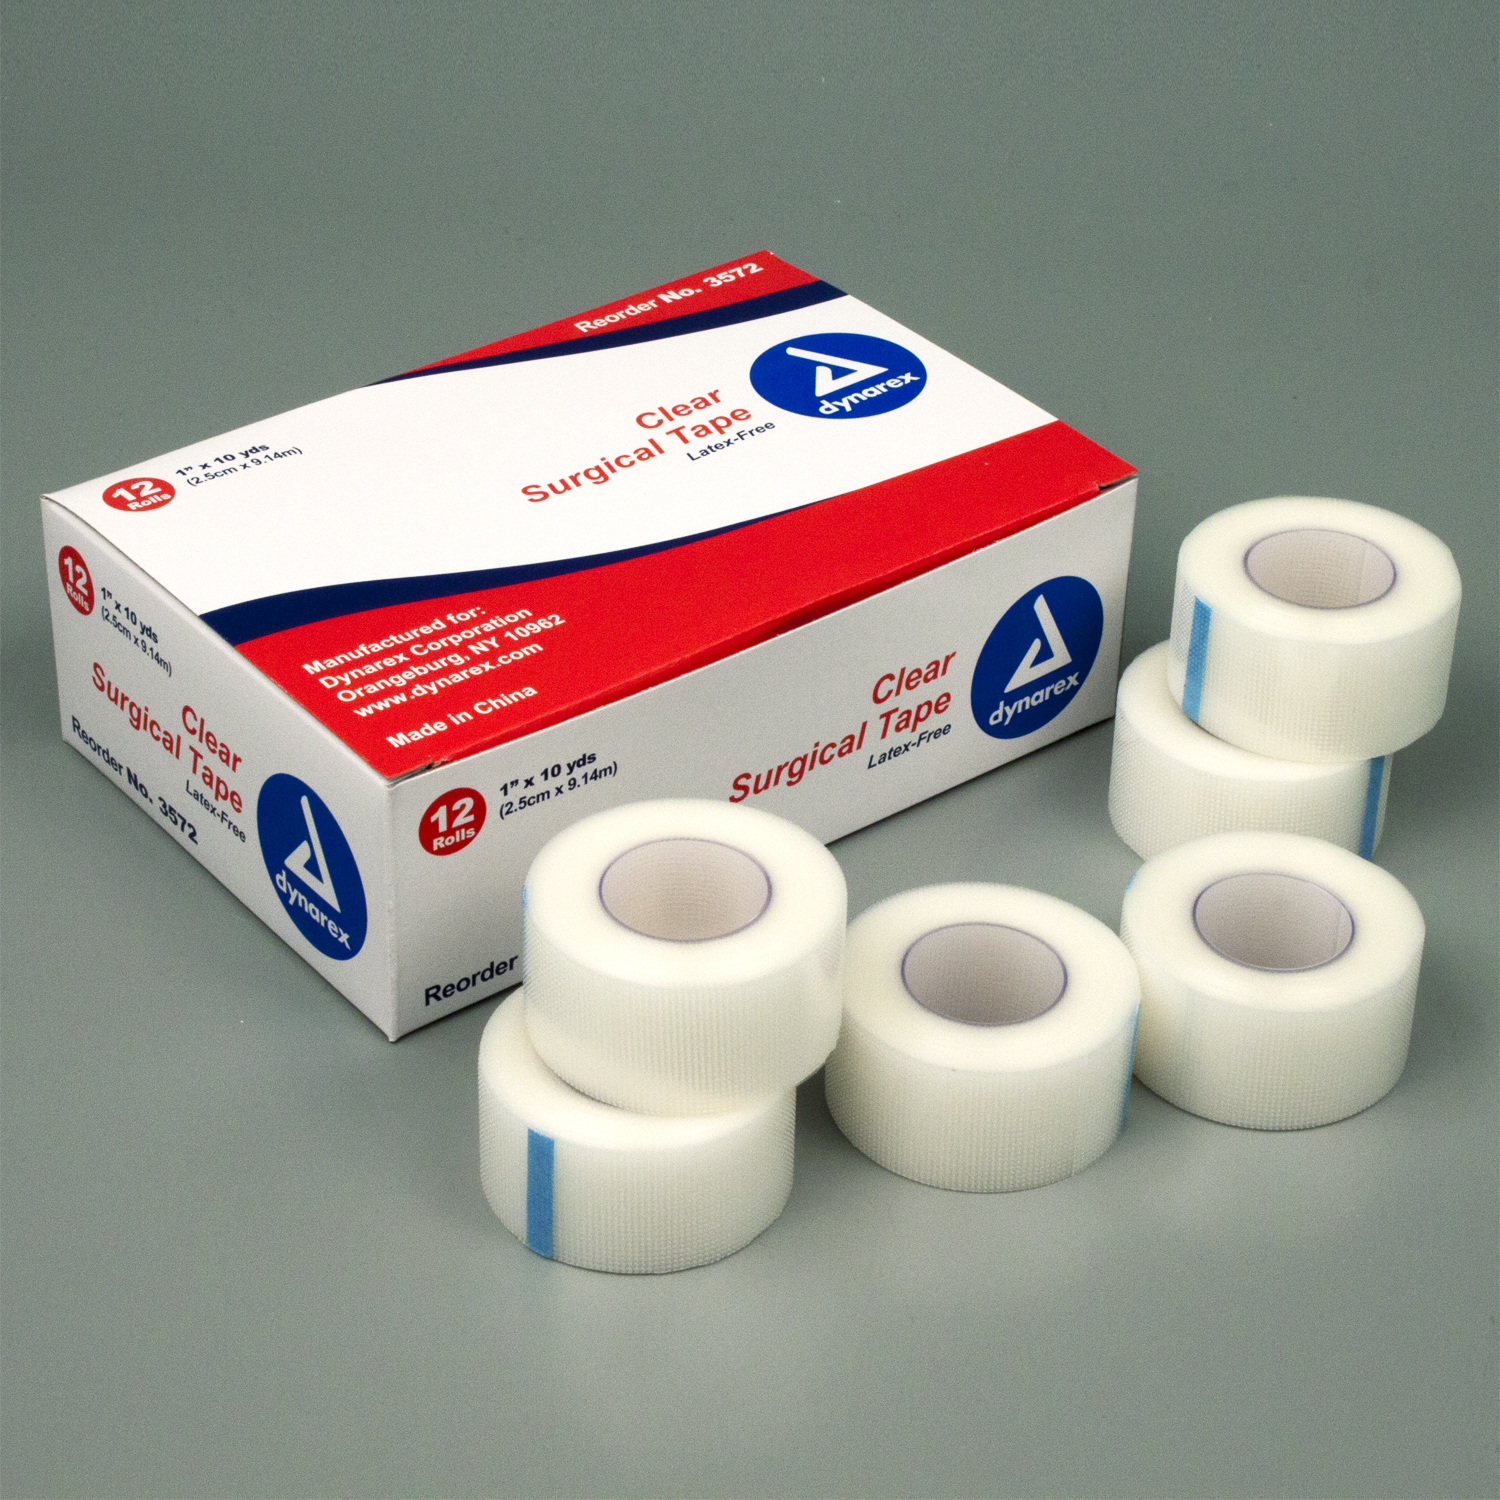 1 Inch Clear Surgical Tape: Single Roll image